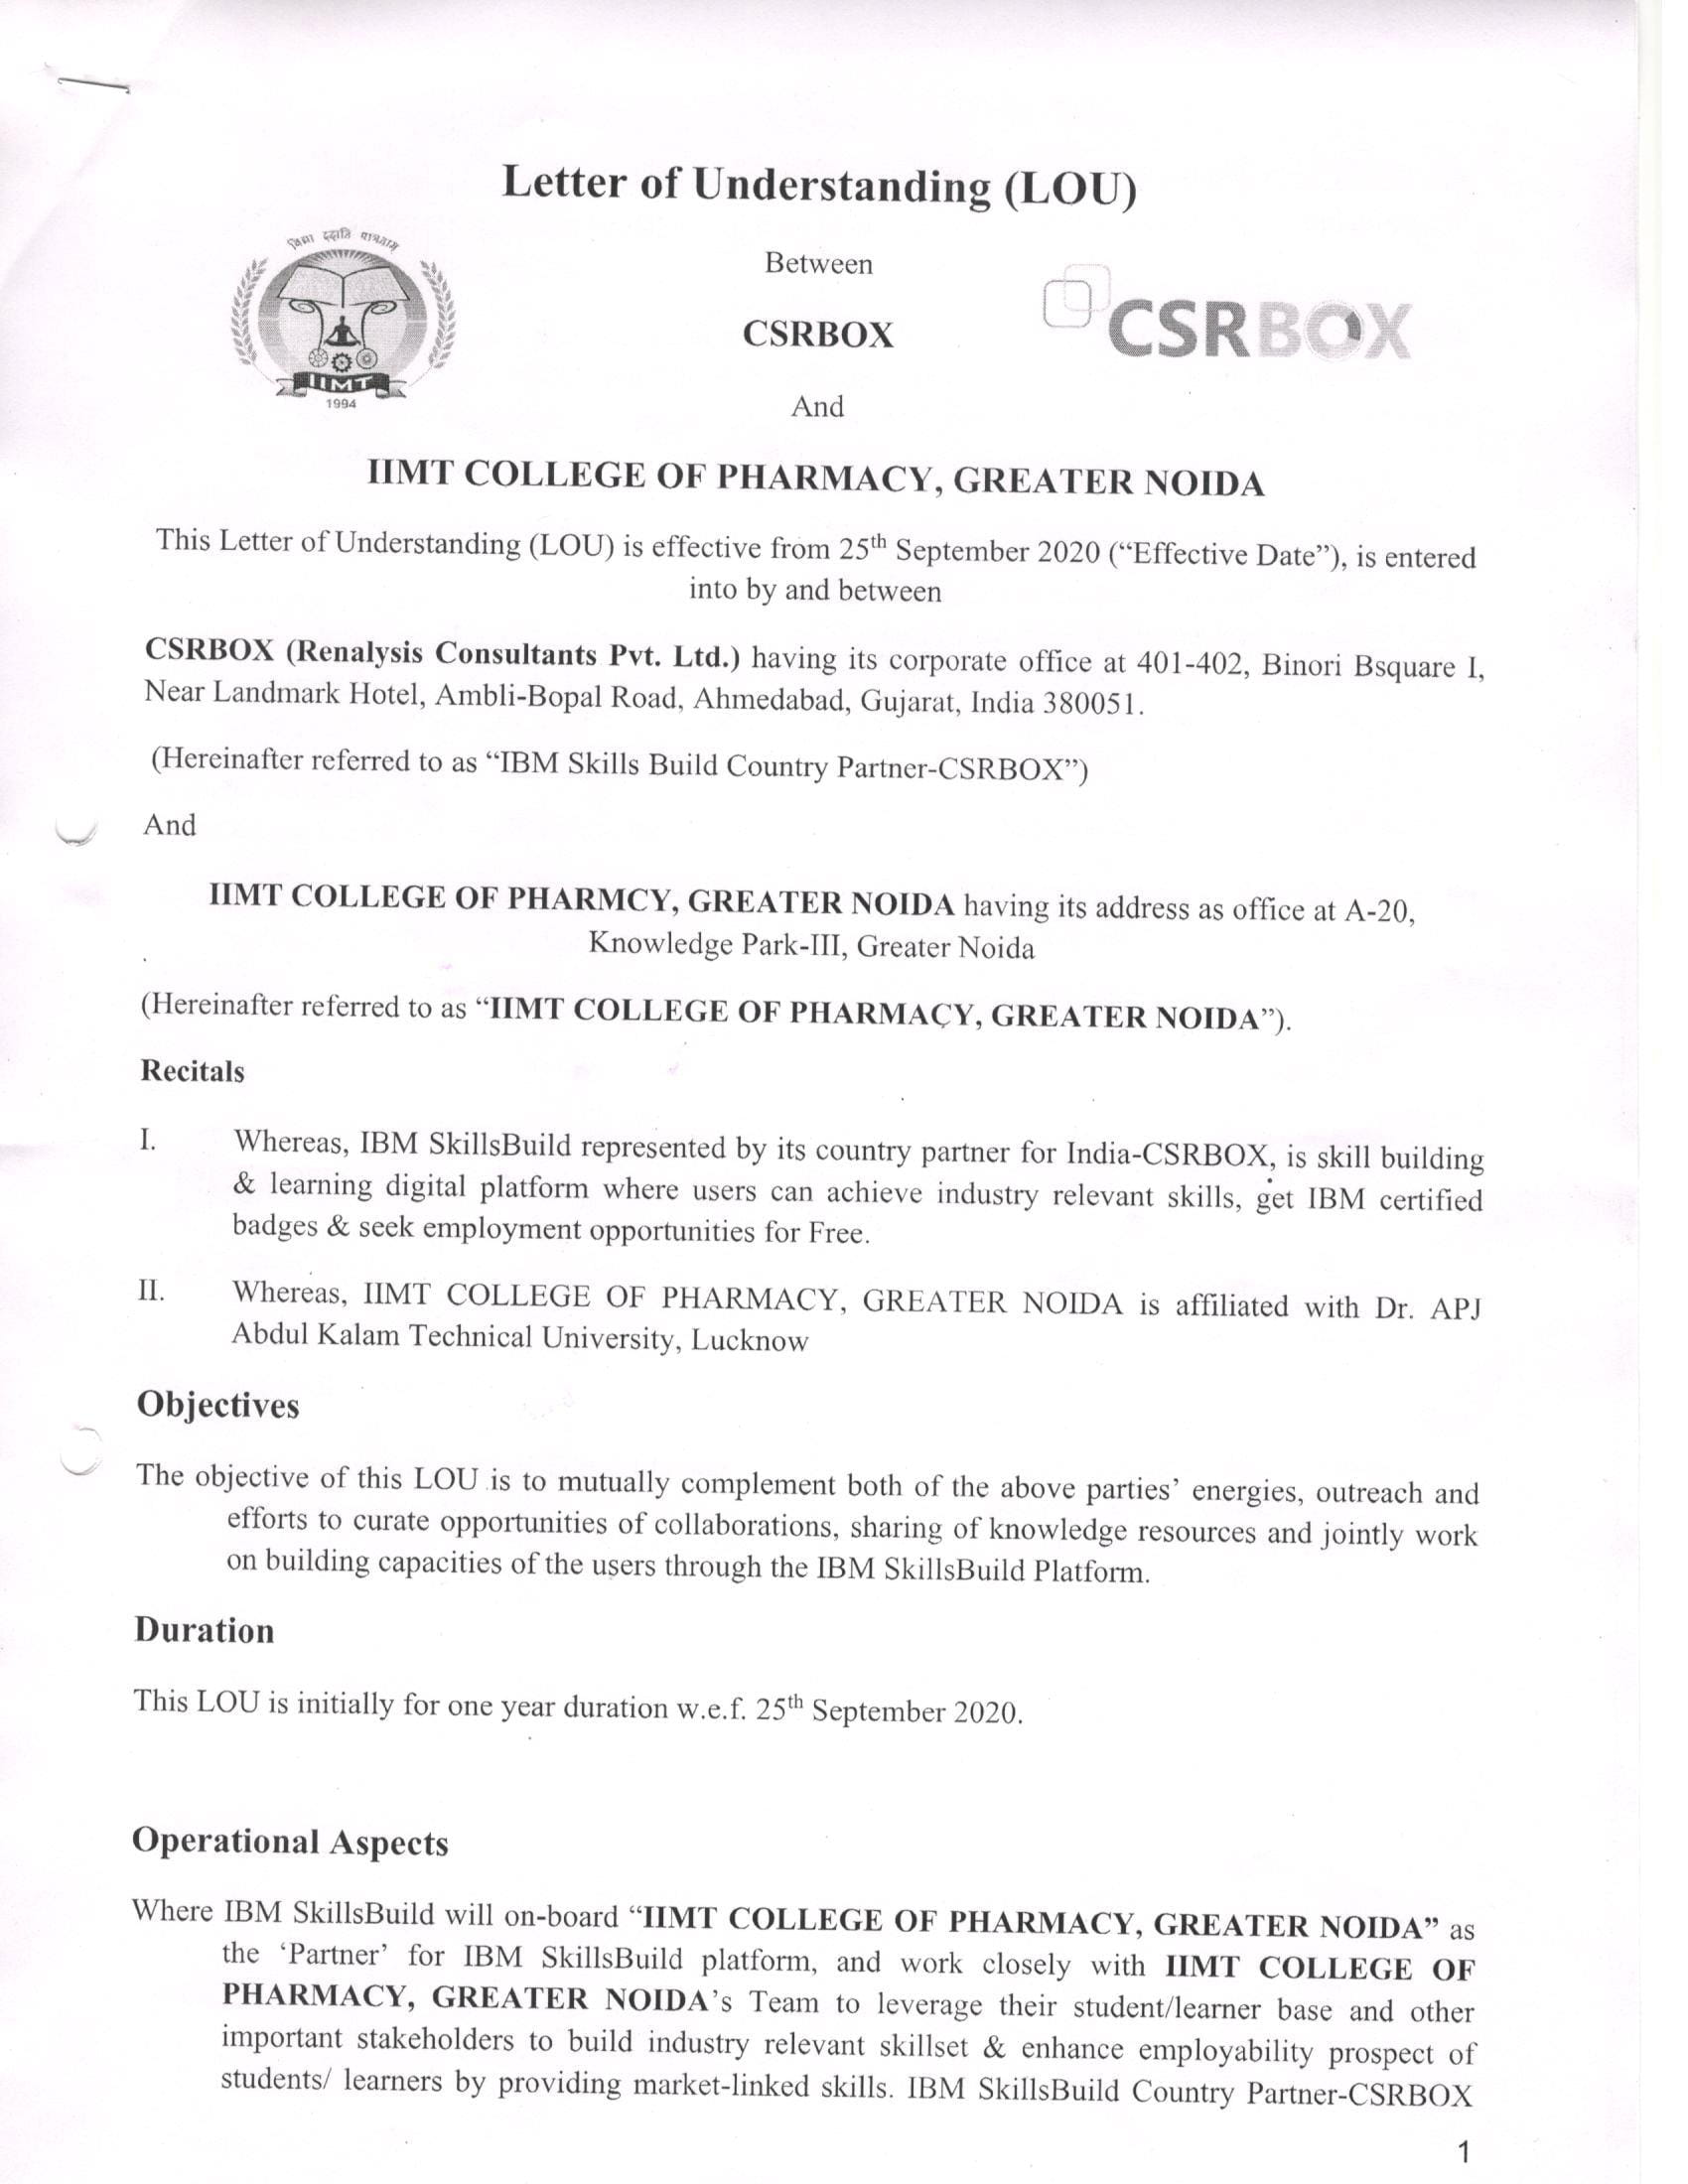 MoU with CSRBOX